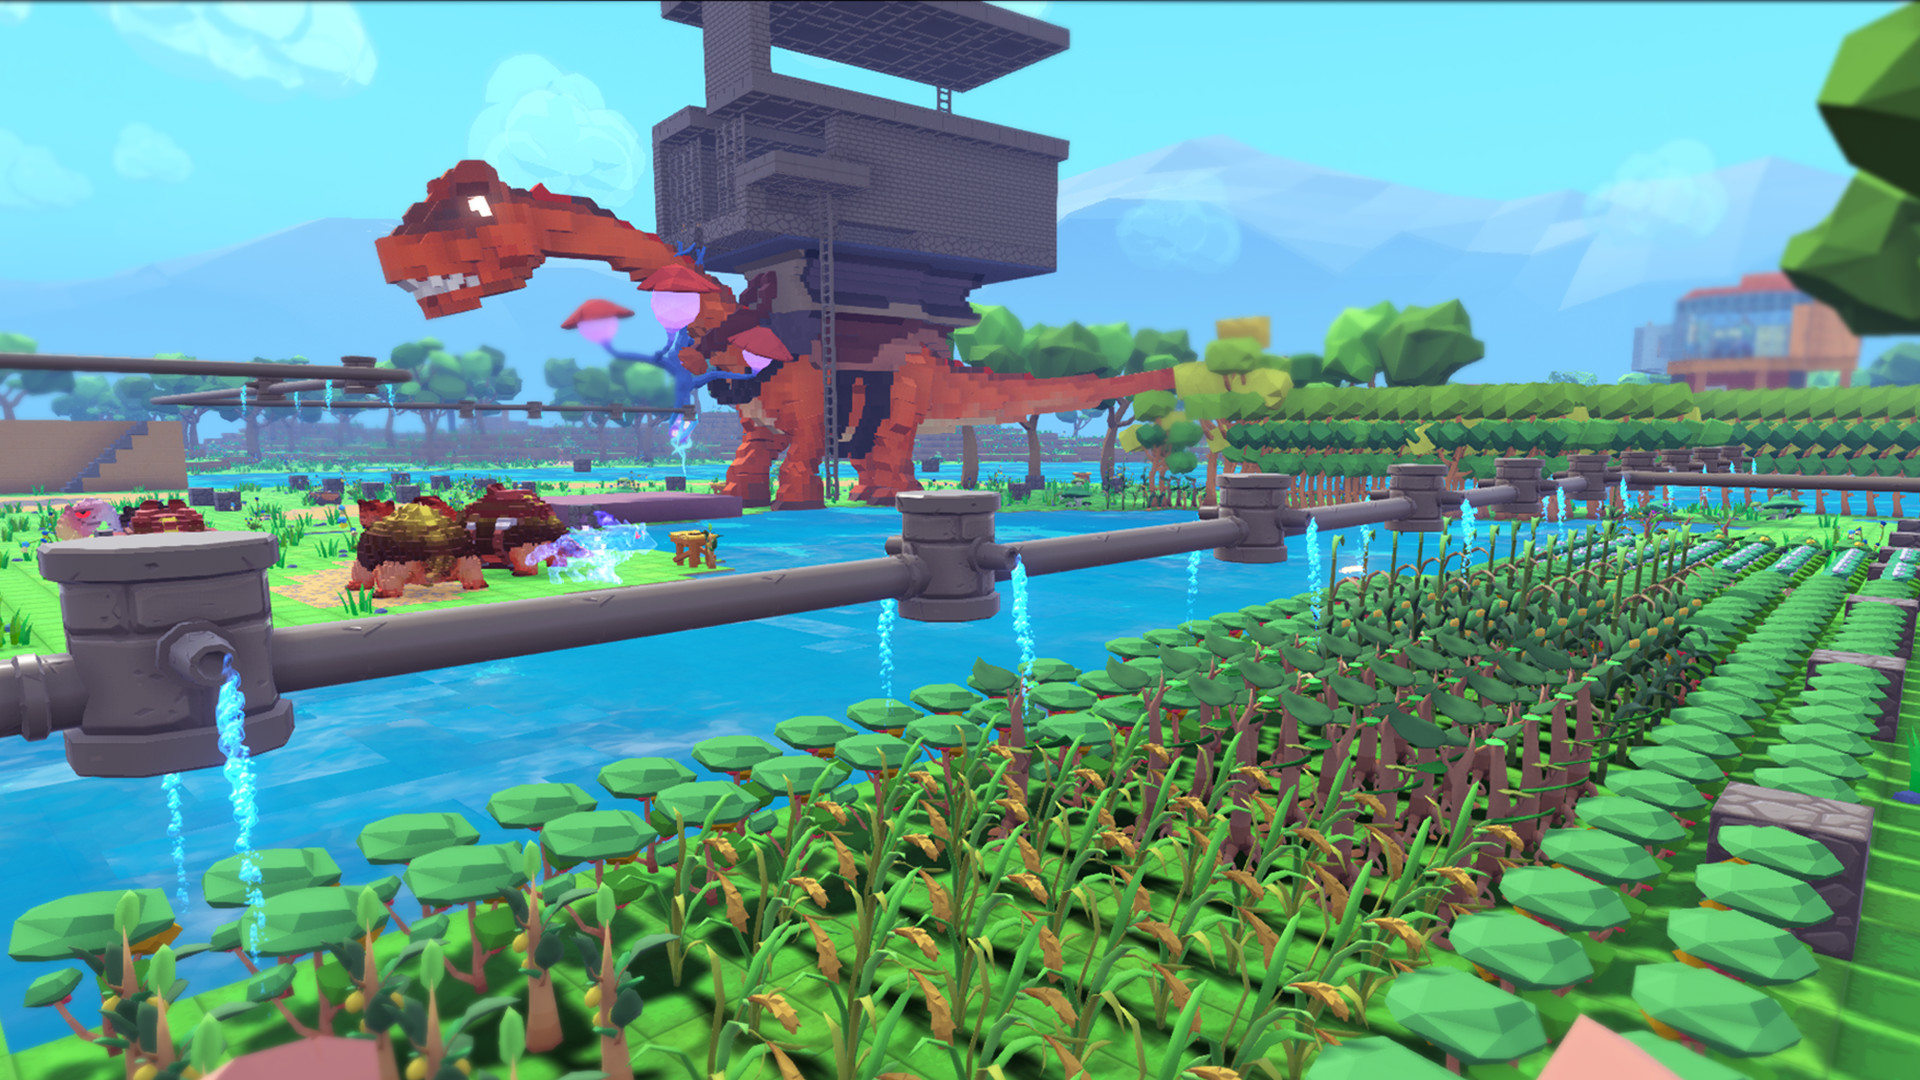 PixARK Free Download for PC